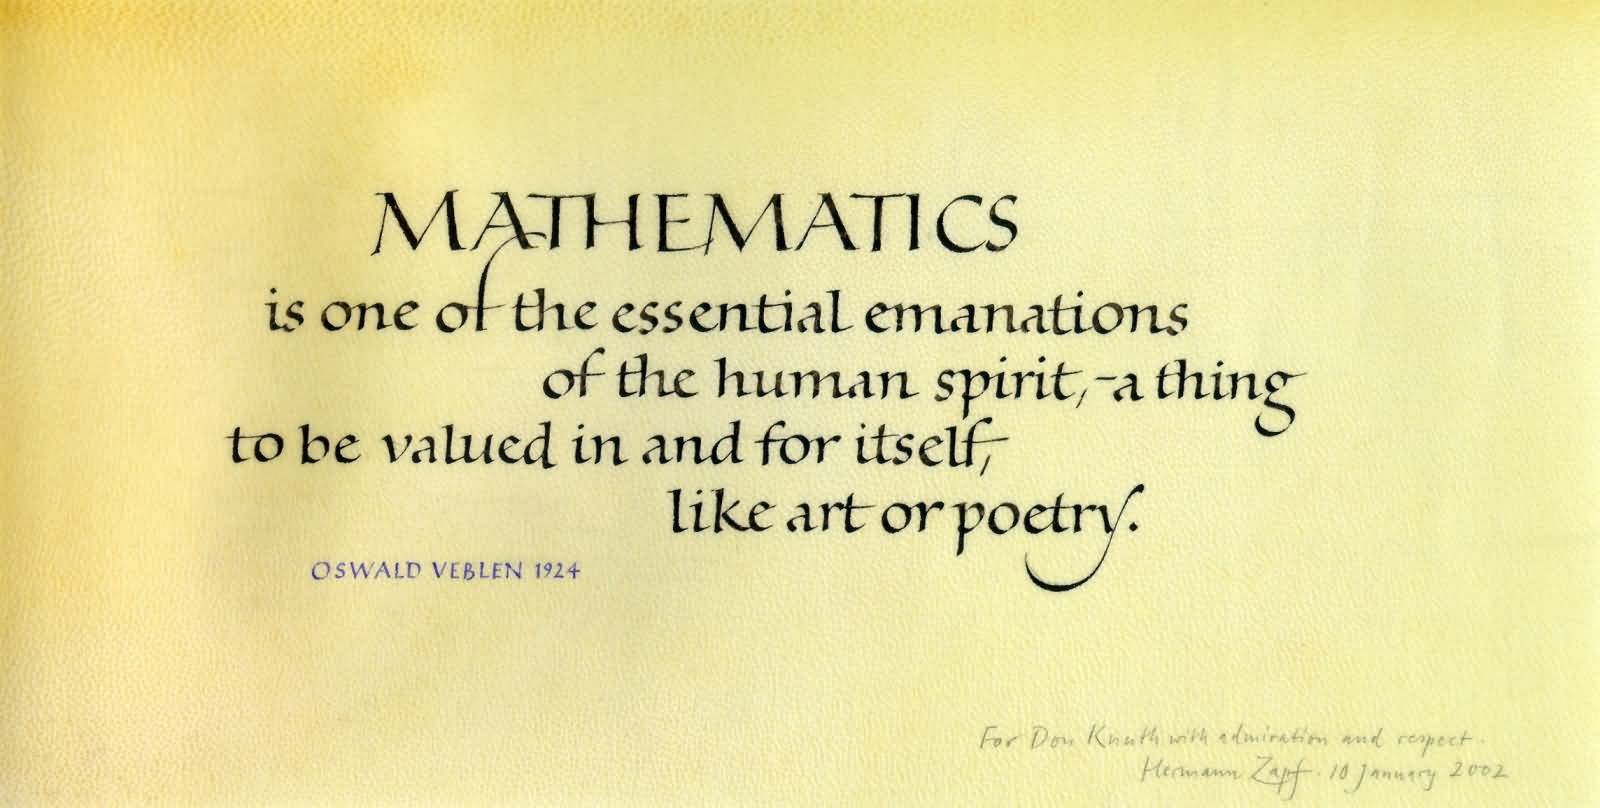 Mathematics is one of the essential emanations of the human spirit, a thing to be valued in and for itself, like art or poetry. Oswald Veblen